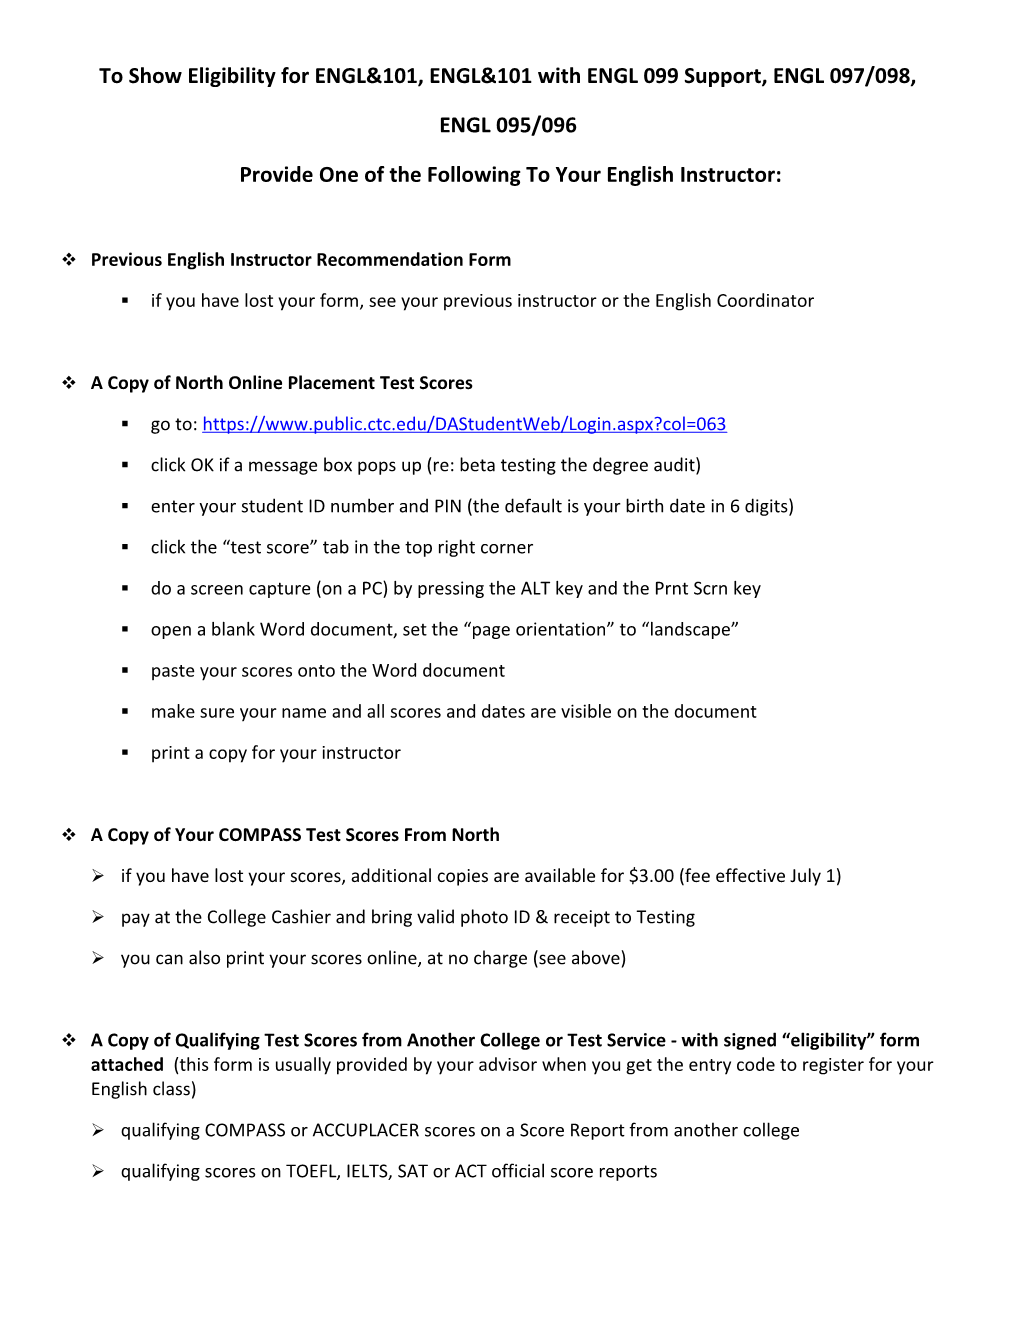 To Show Eligibility for ENGL&101, ENGL&101 with ENGL 099 Support, ENGL 097/098